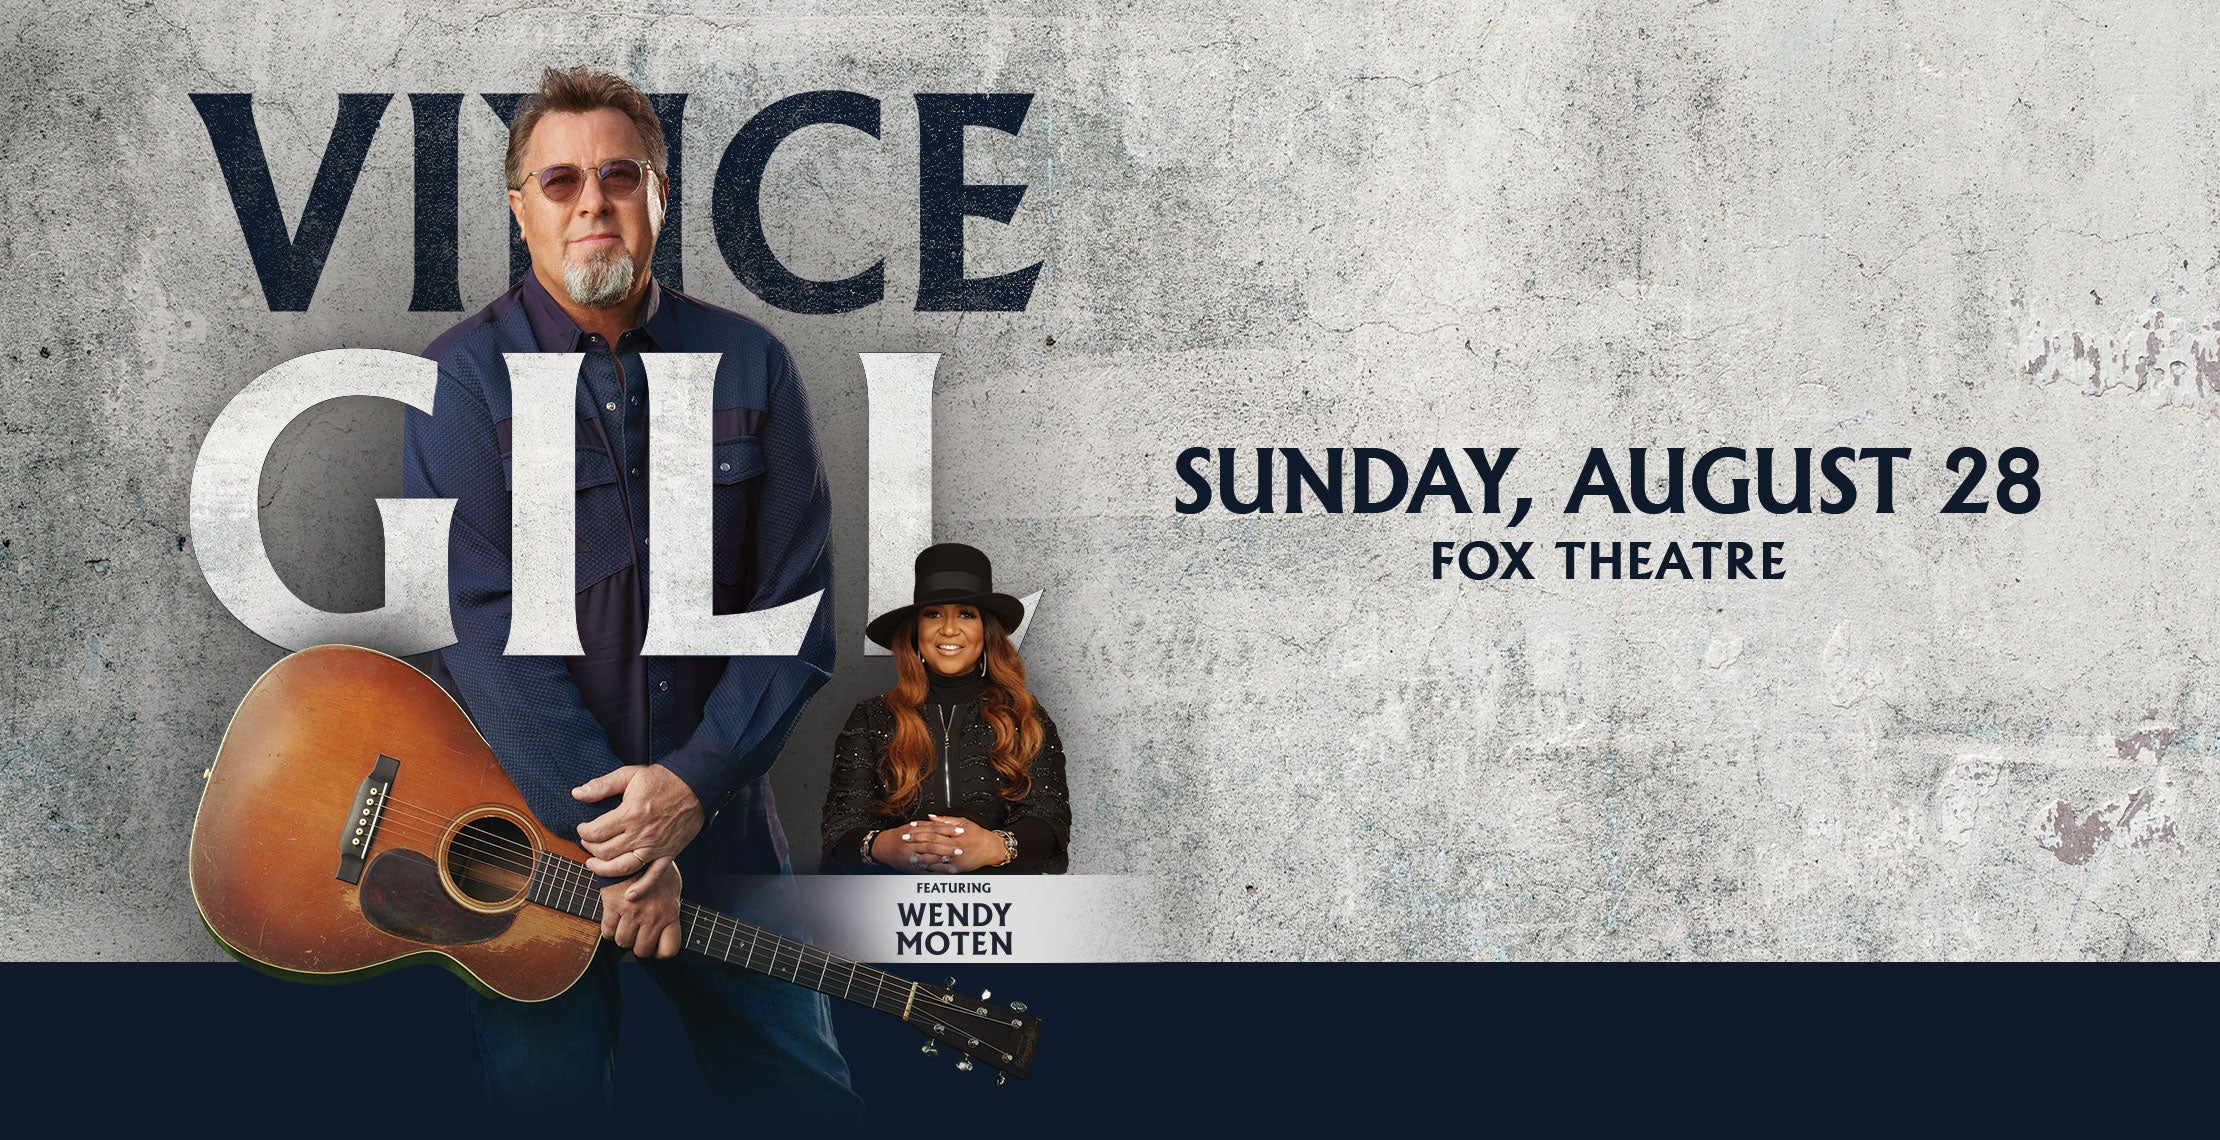 An Evening with Vince Gill